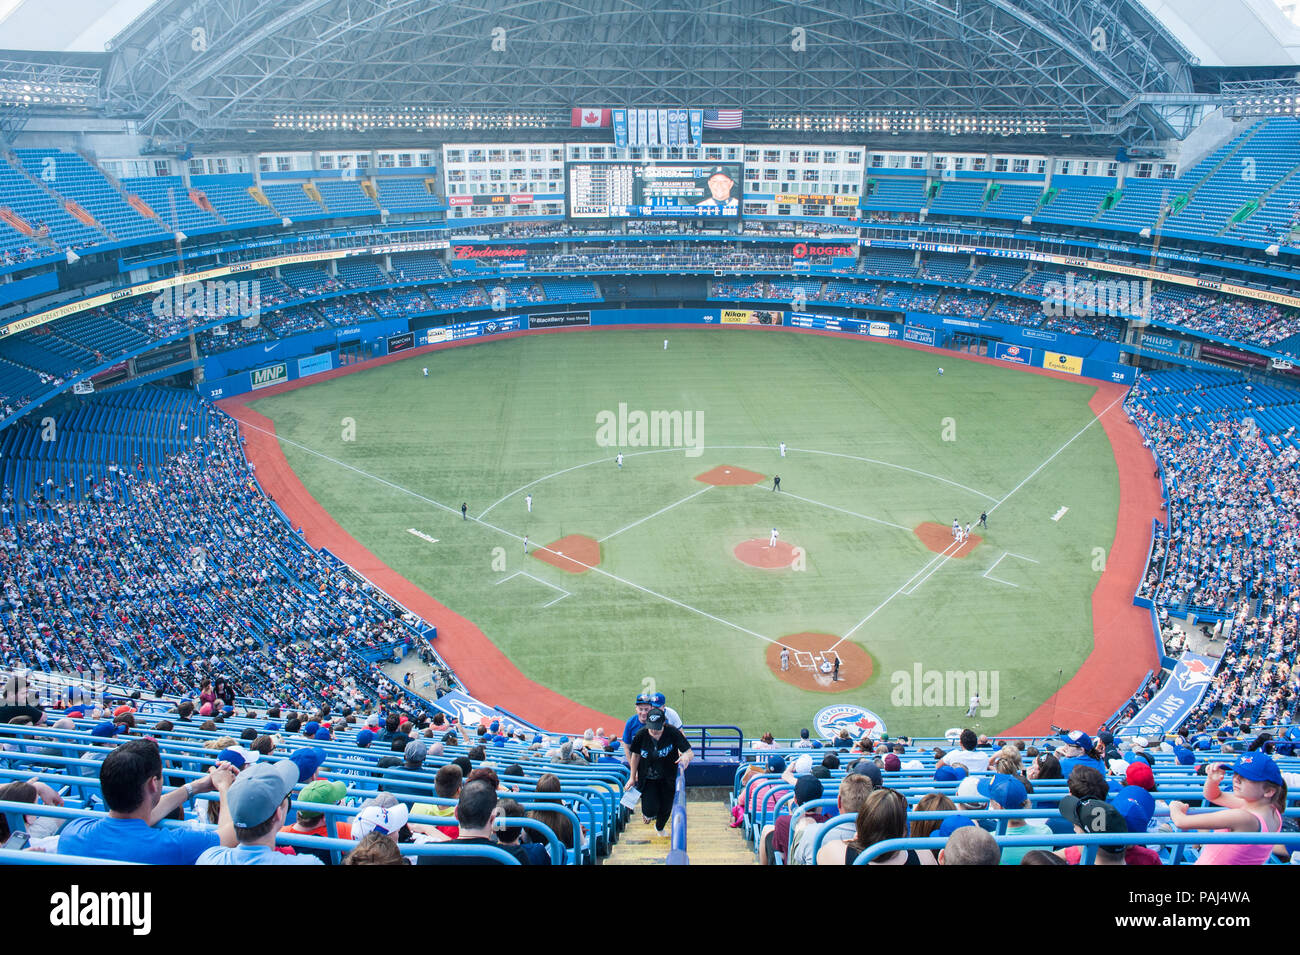 A view of a baseball match between the Toronto Blue Jays and the Detroit Tigers at the Rogers Centre, Toronto, Ontario. Stock Photo